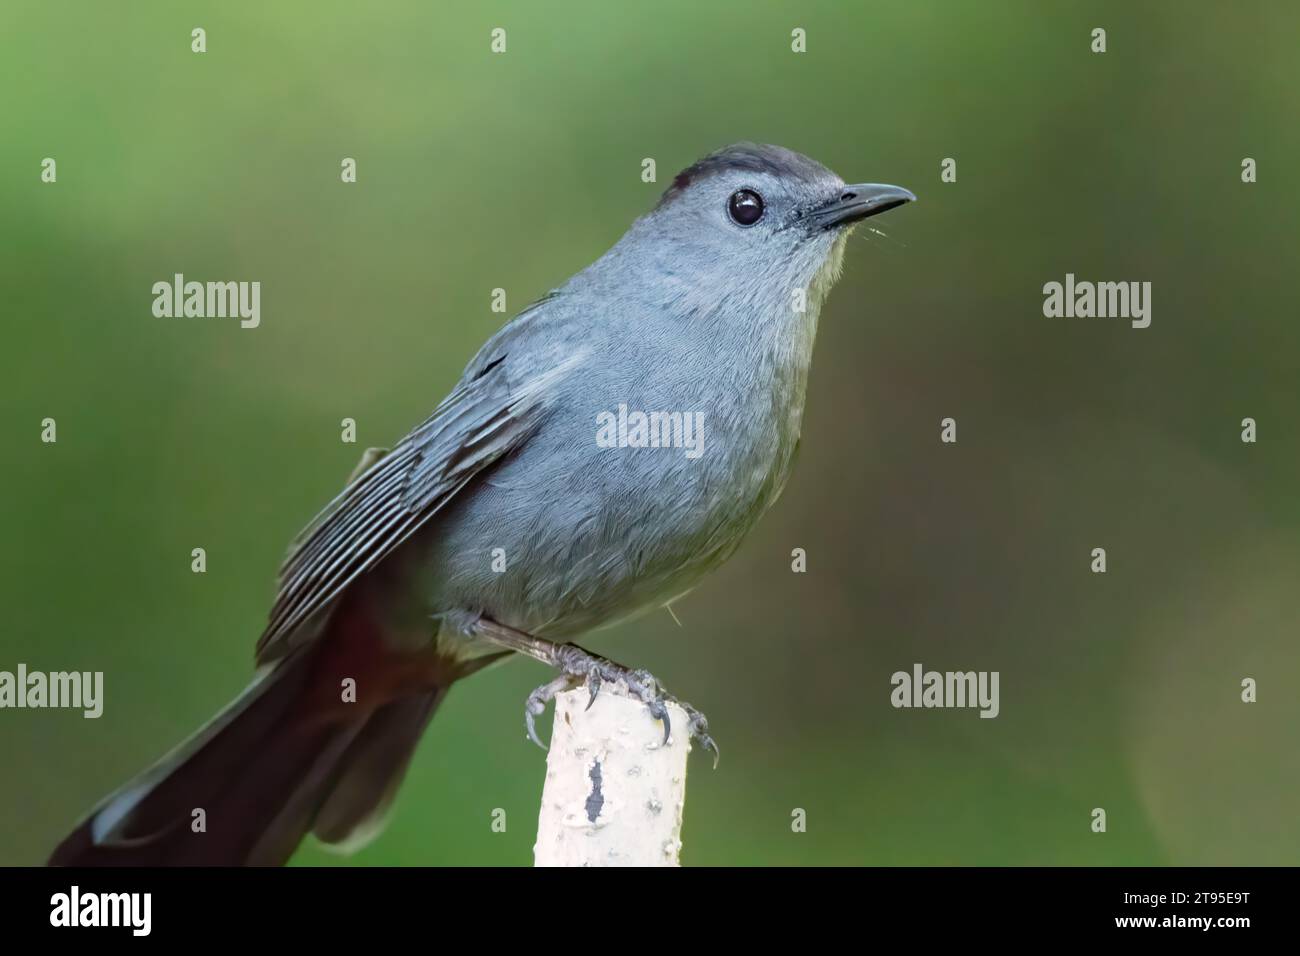 Gray Catbird (Dumetella carolinensis) perched on a Birch tree with blurry background  in the Chippewa National Forest, northern Minnesota USA Stock Photo